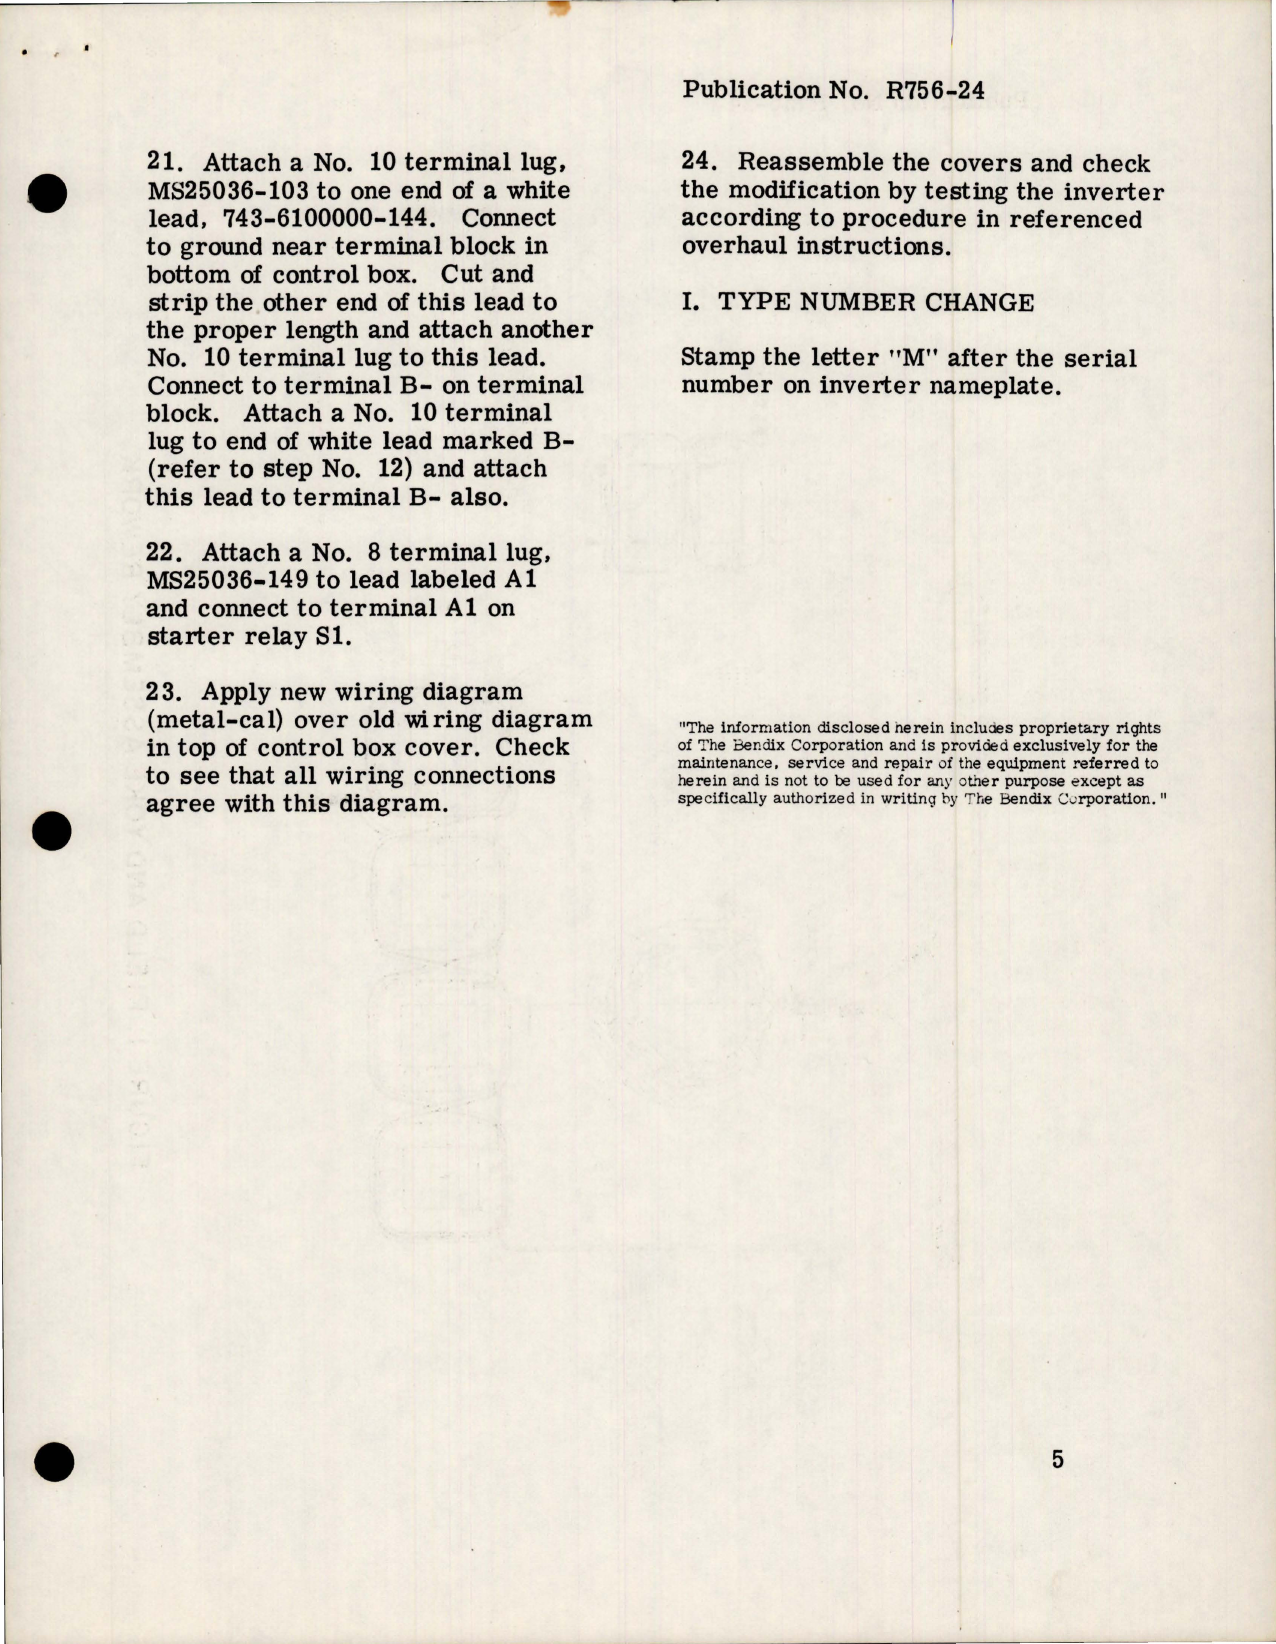 Sample page 5 from AirCorps Library document: Service Bulletin R-329, Installation of Voltage and Frequency Regulator Kit - Type 4B93-26-A 